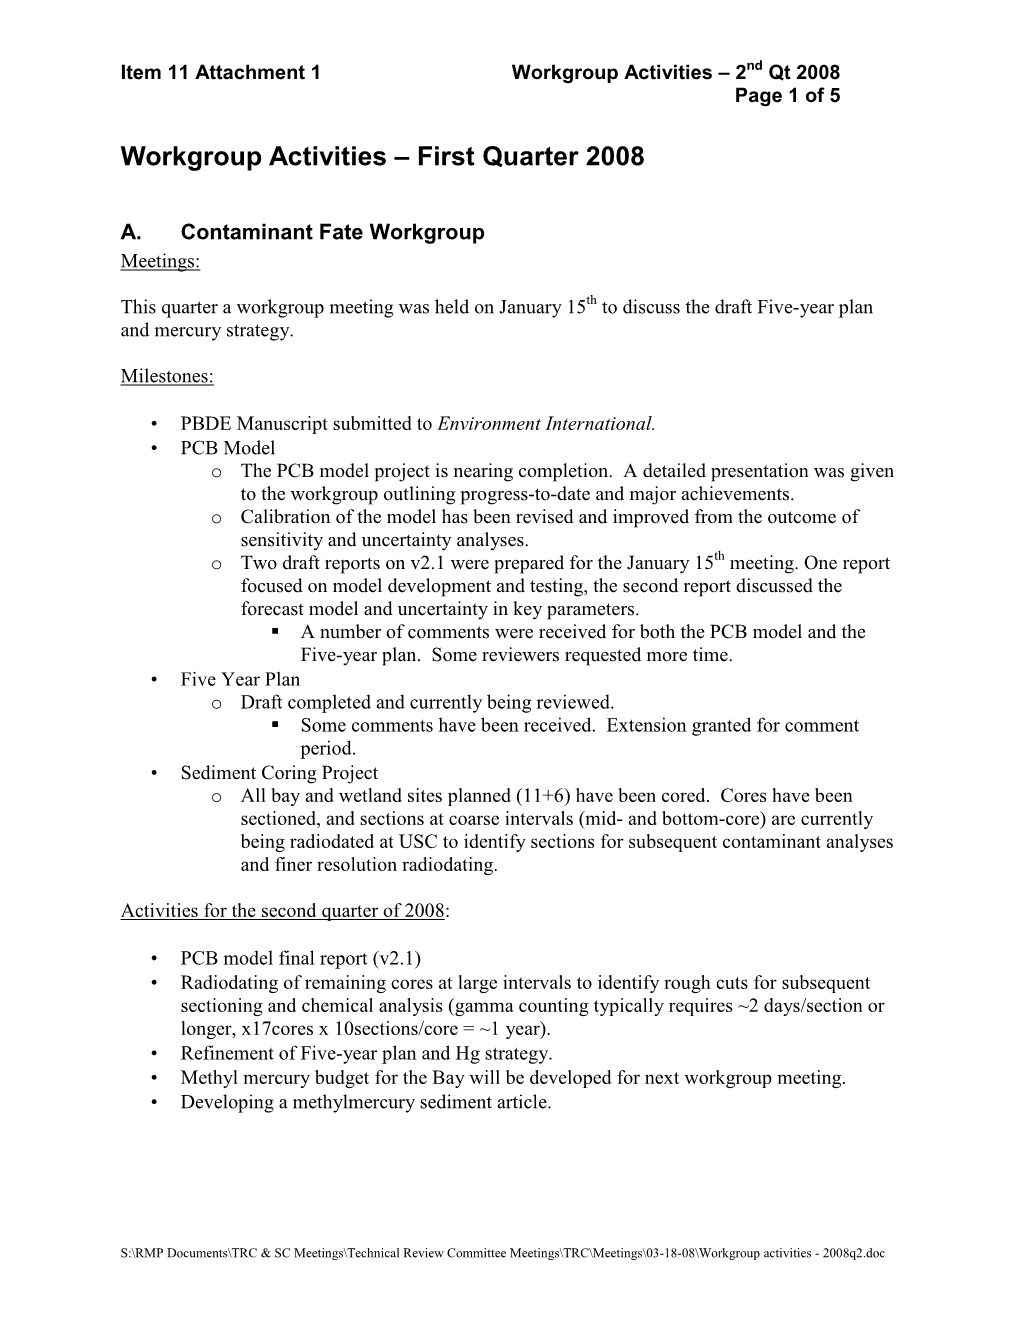 Workgroup Activities – First Quarter 2008